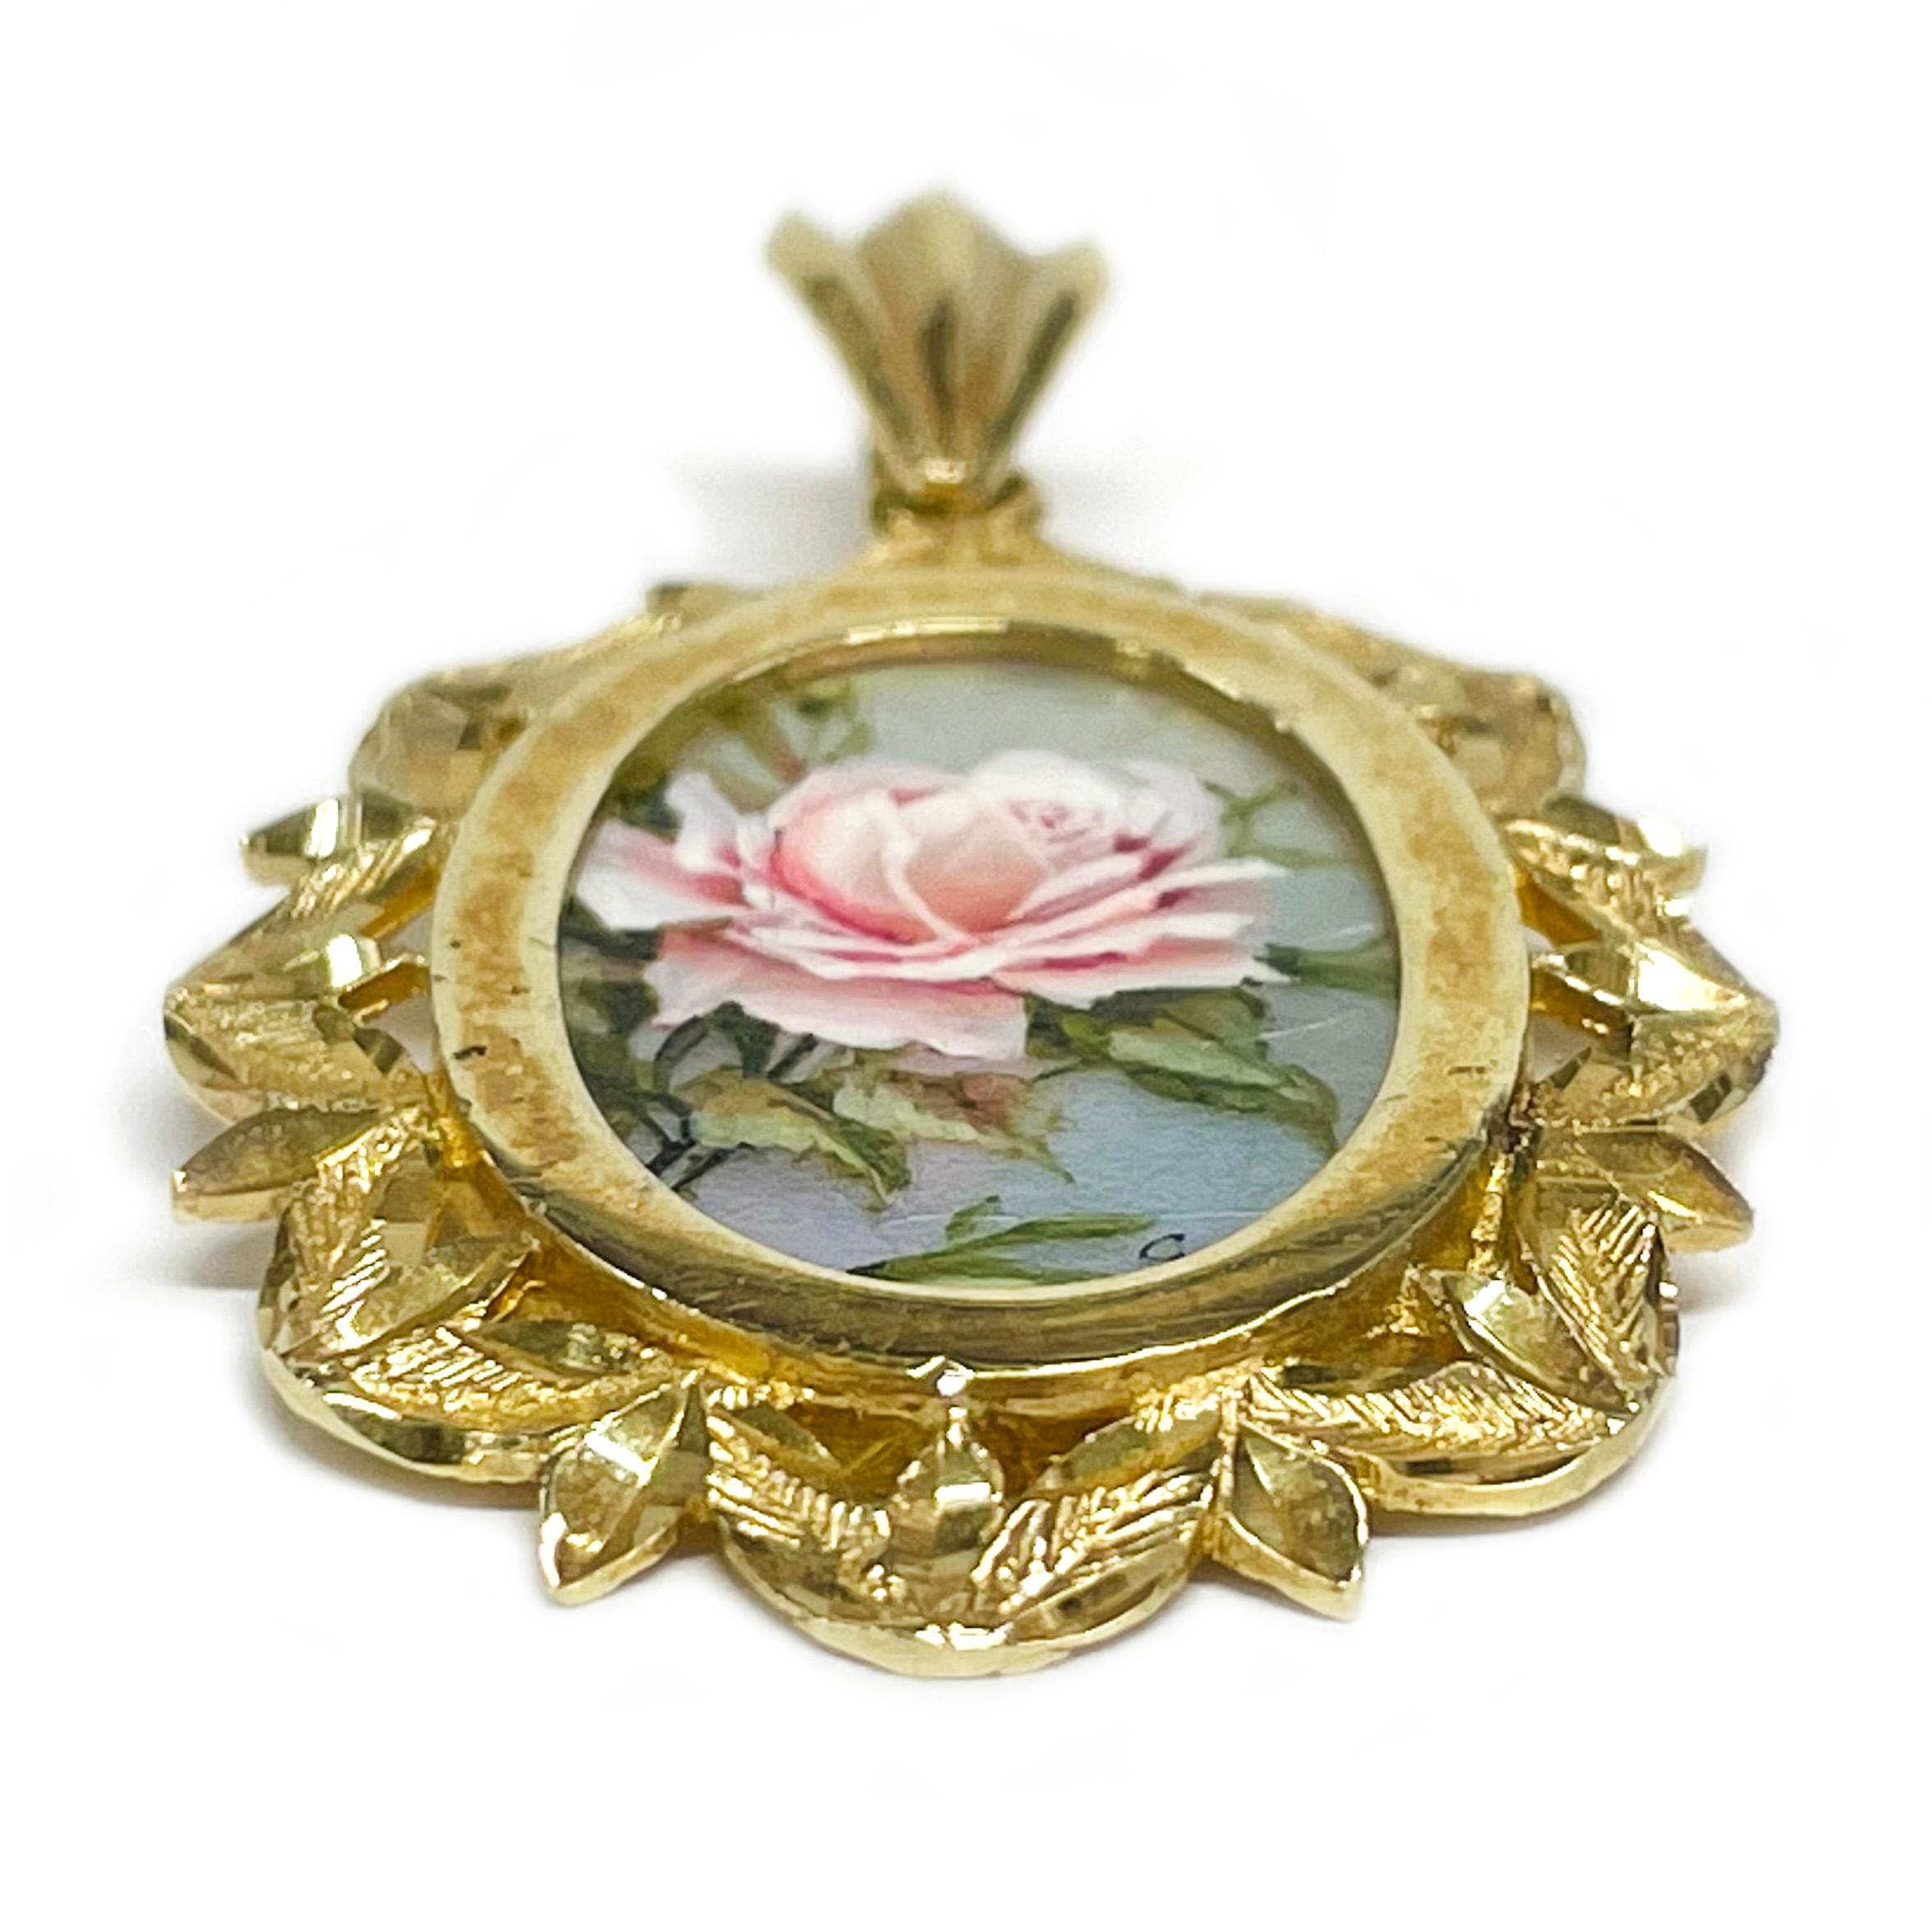 14 Karat Yellow Gold Pink Rose Hand Painted on a Mother of Pearl Pendant. The miniature painting is set in a 14 karat gold ornate oval frame with diamond-cut details. The painting is signed by the master artist, CR Charlotte. The pendant measures